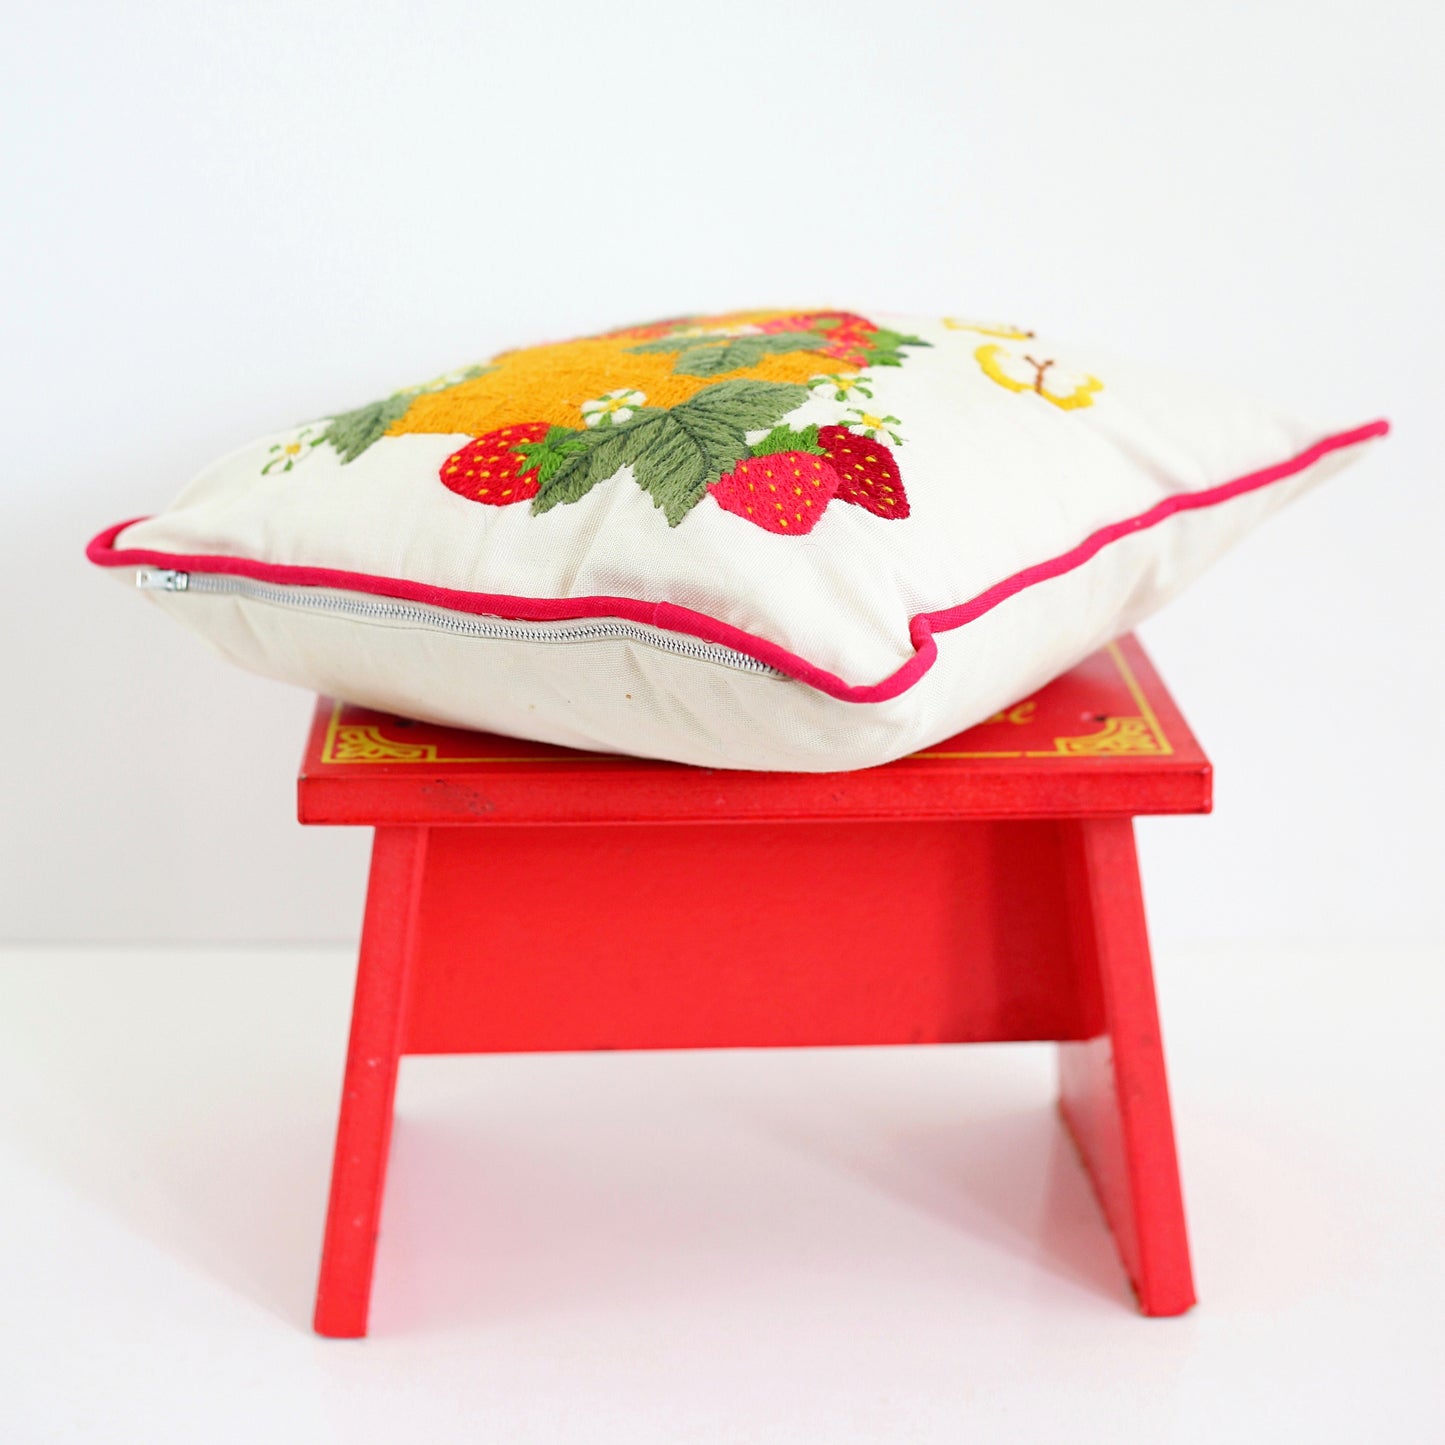 SOLD - Vintage Strawberries Crewel Embroidery Throw Pillow